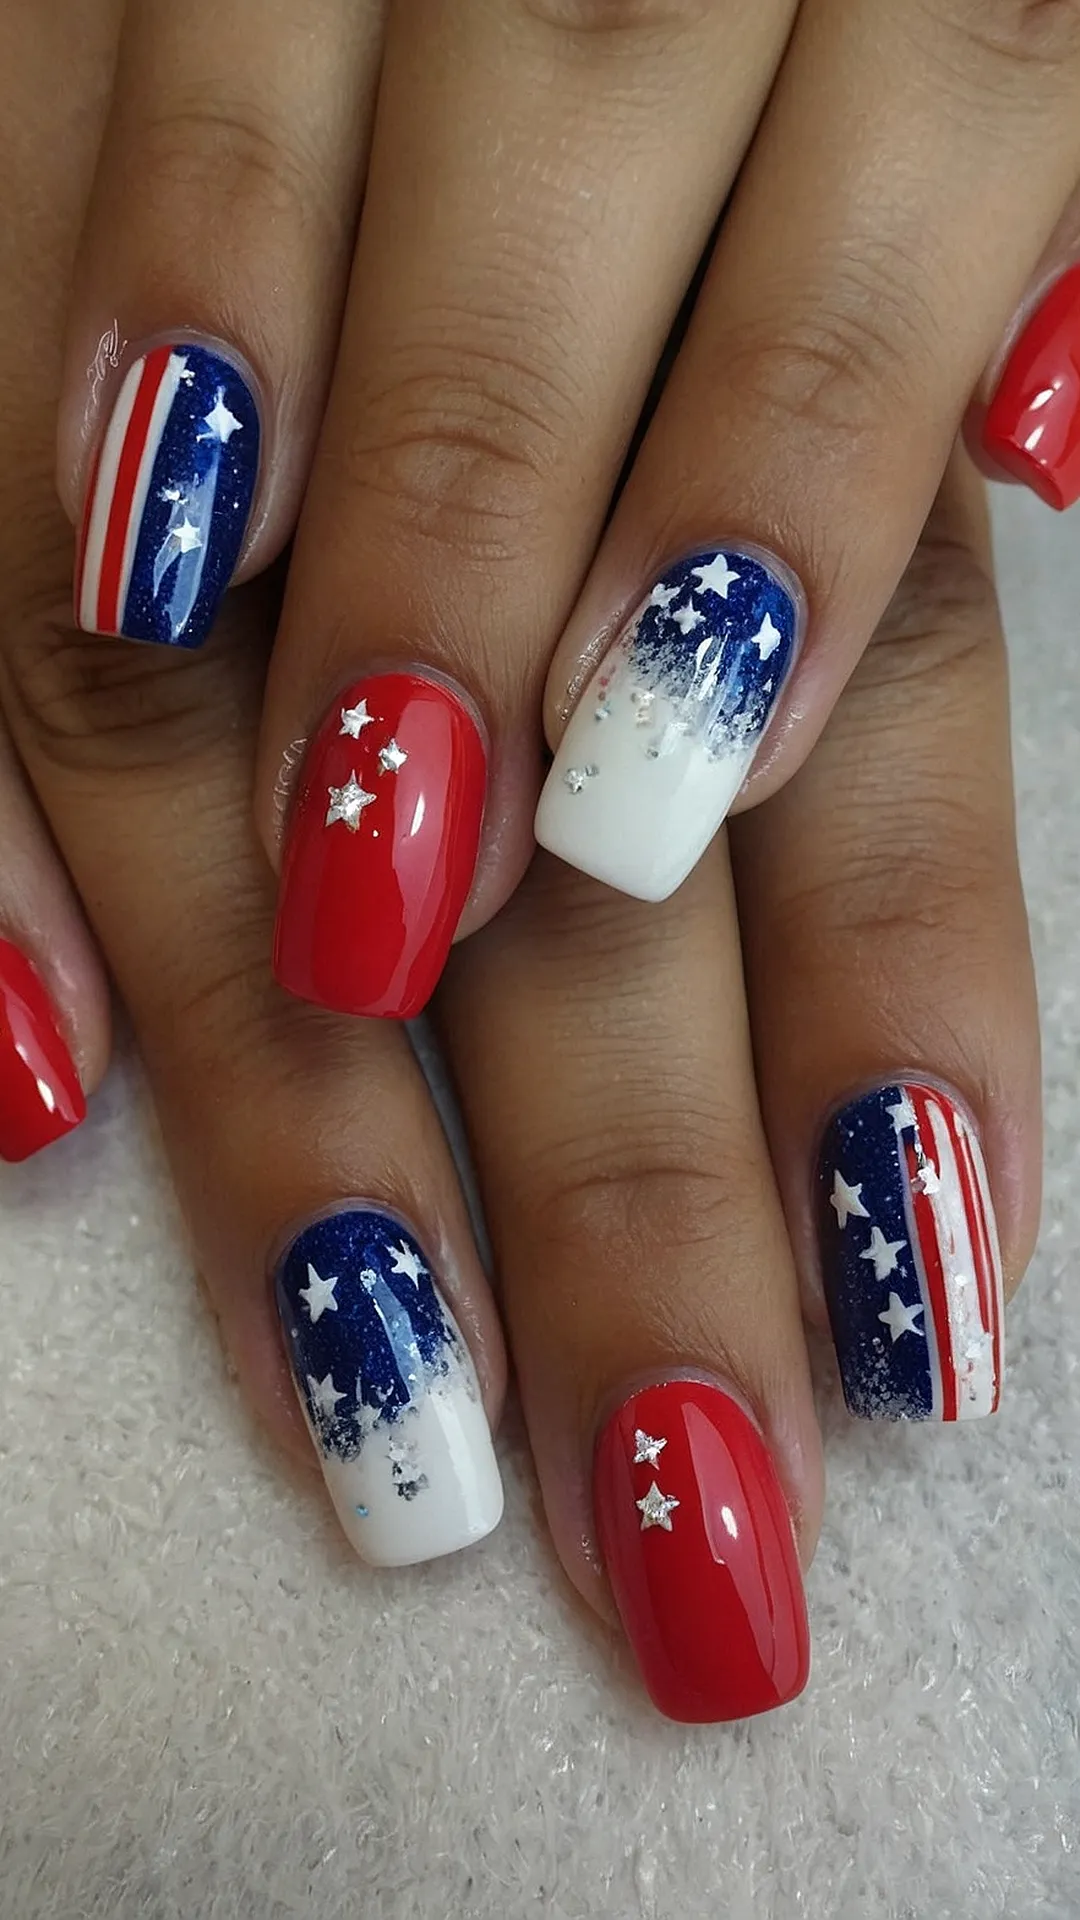 Firecracker Fingers: Fun and Festive 4th of July Nails